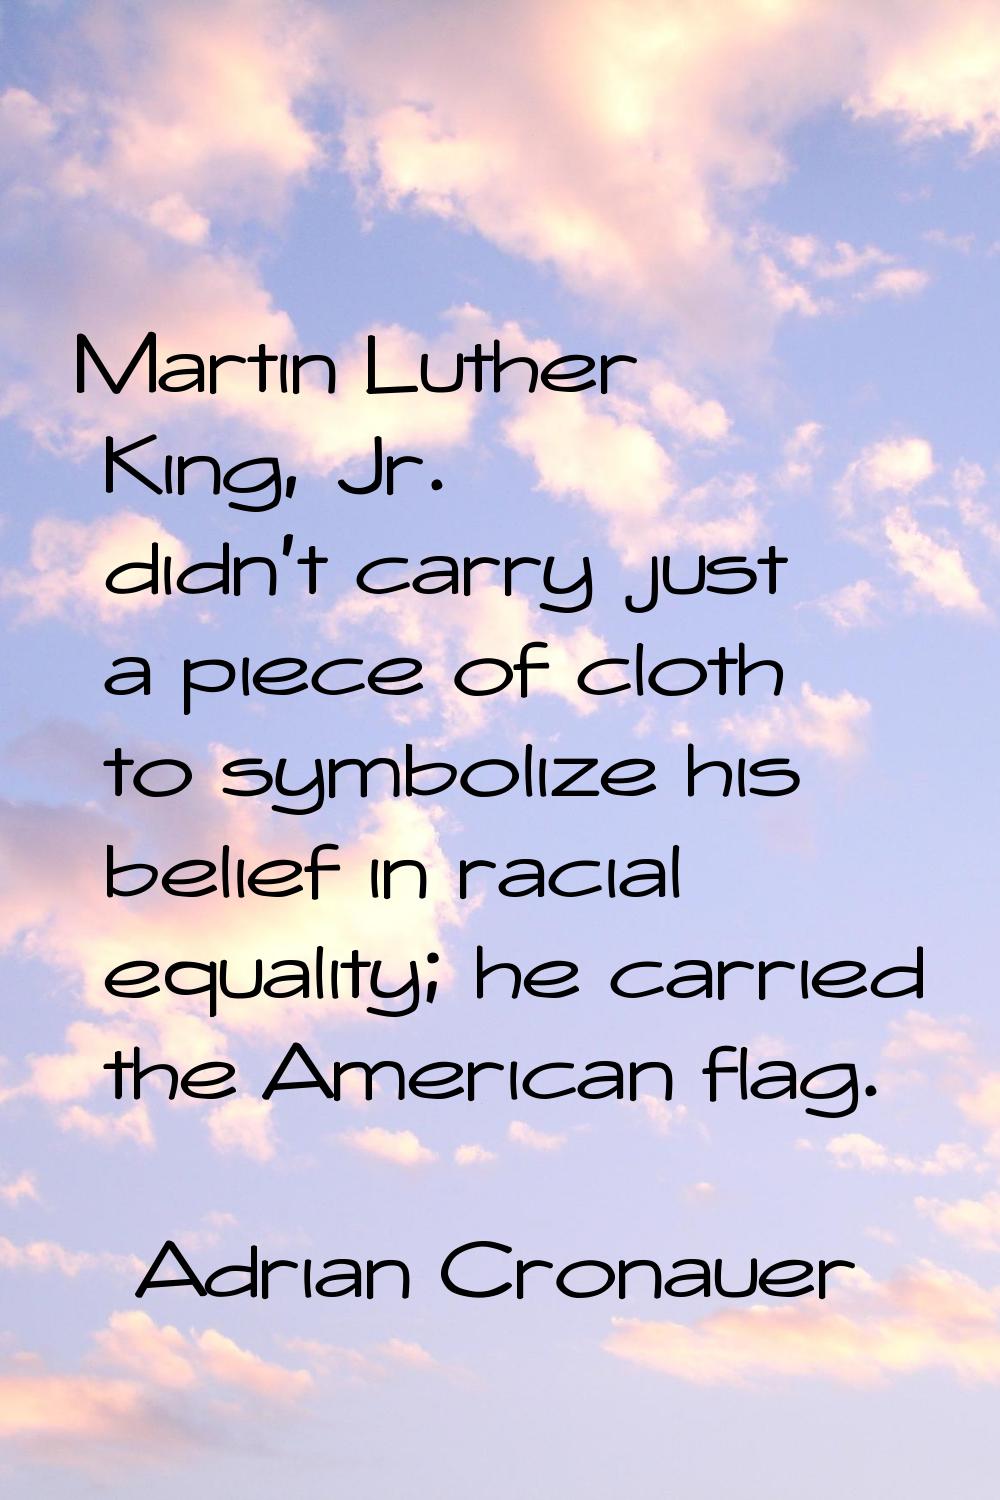 Martin Luther King, Jr. didn't carry just a piece of cloth to symbolize his belief in racial equali